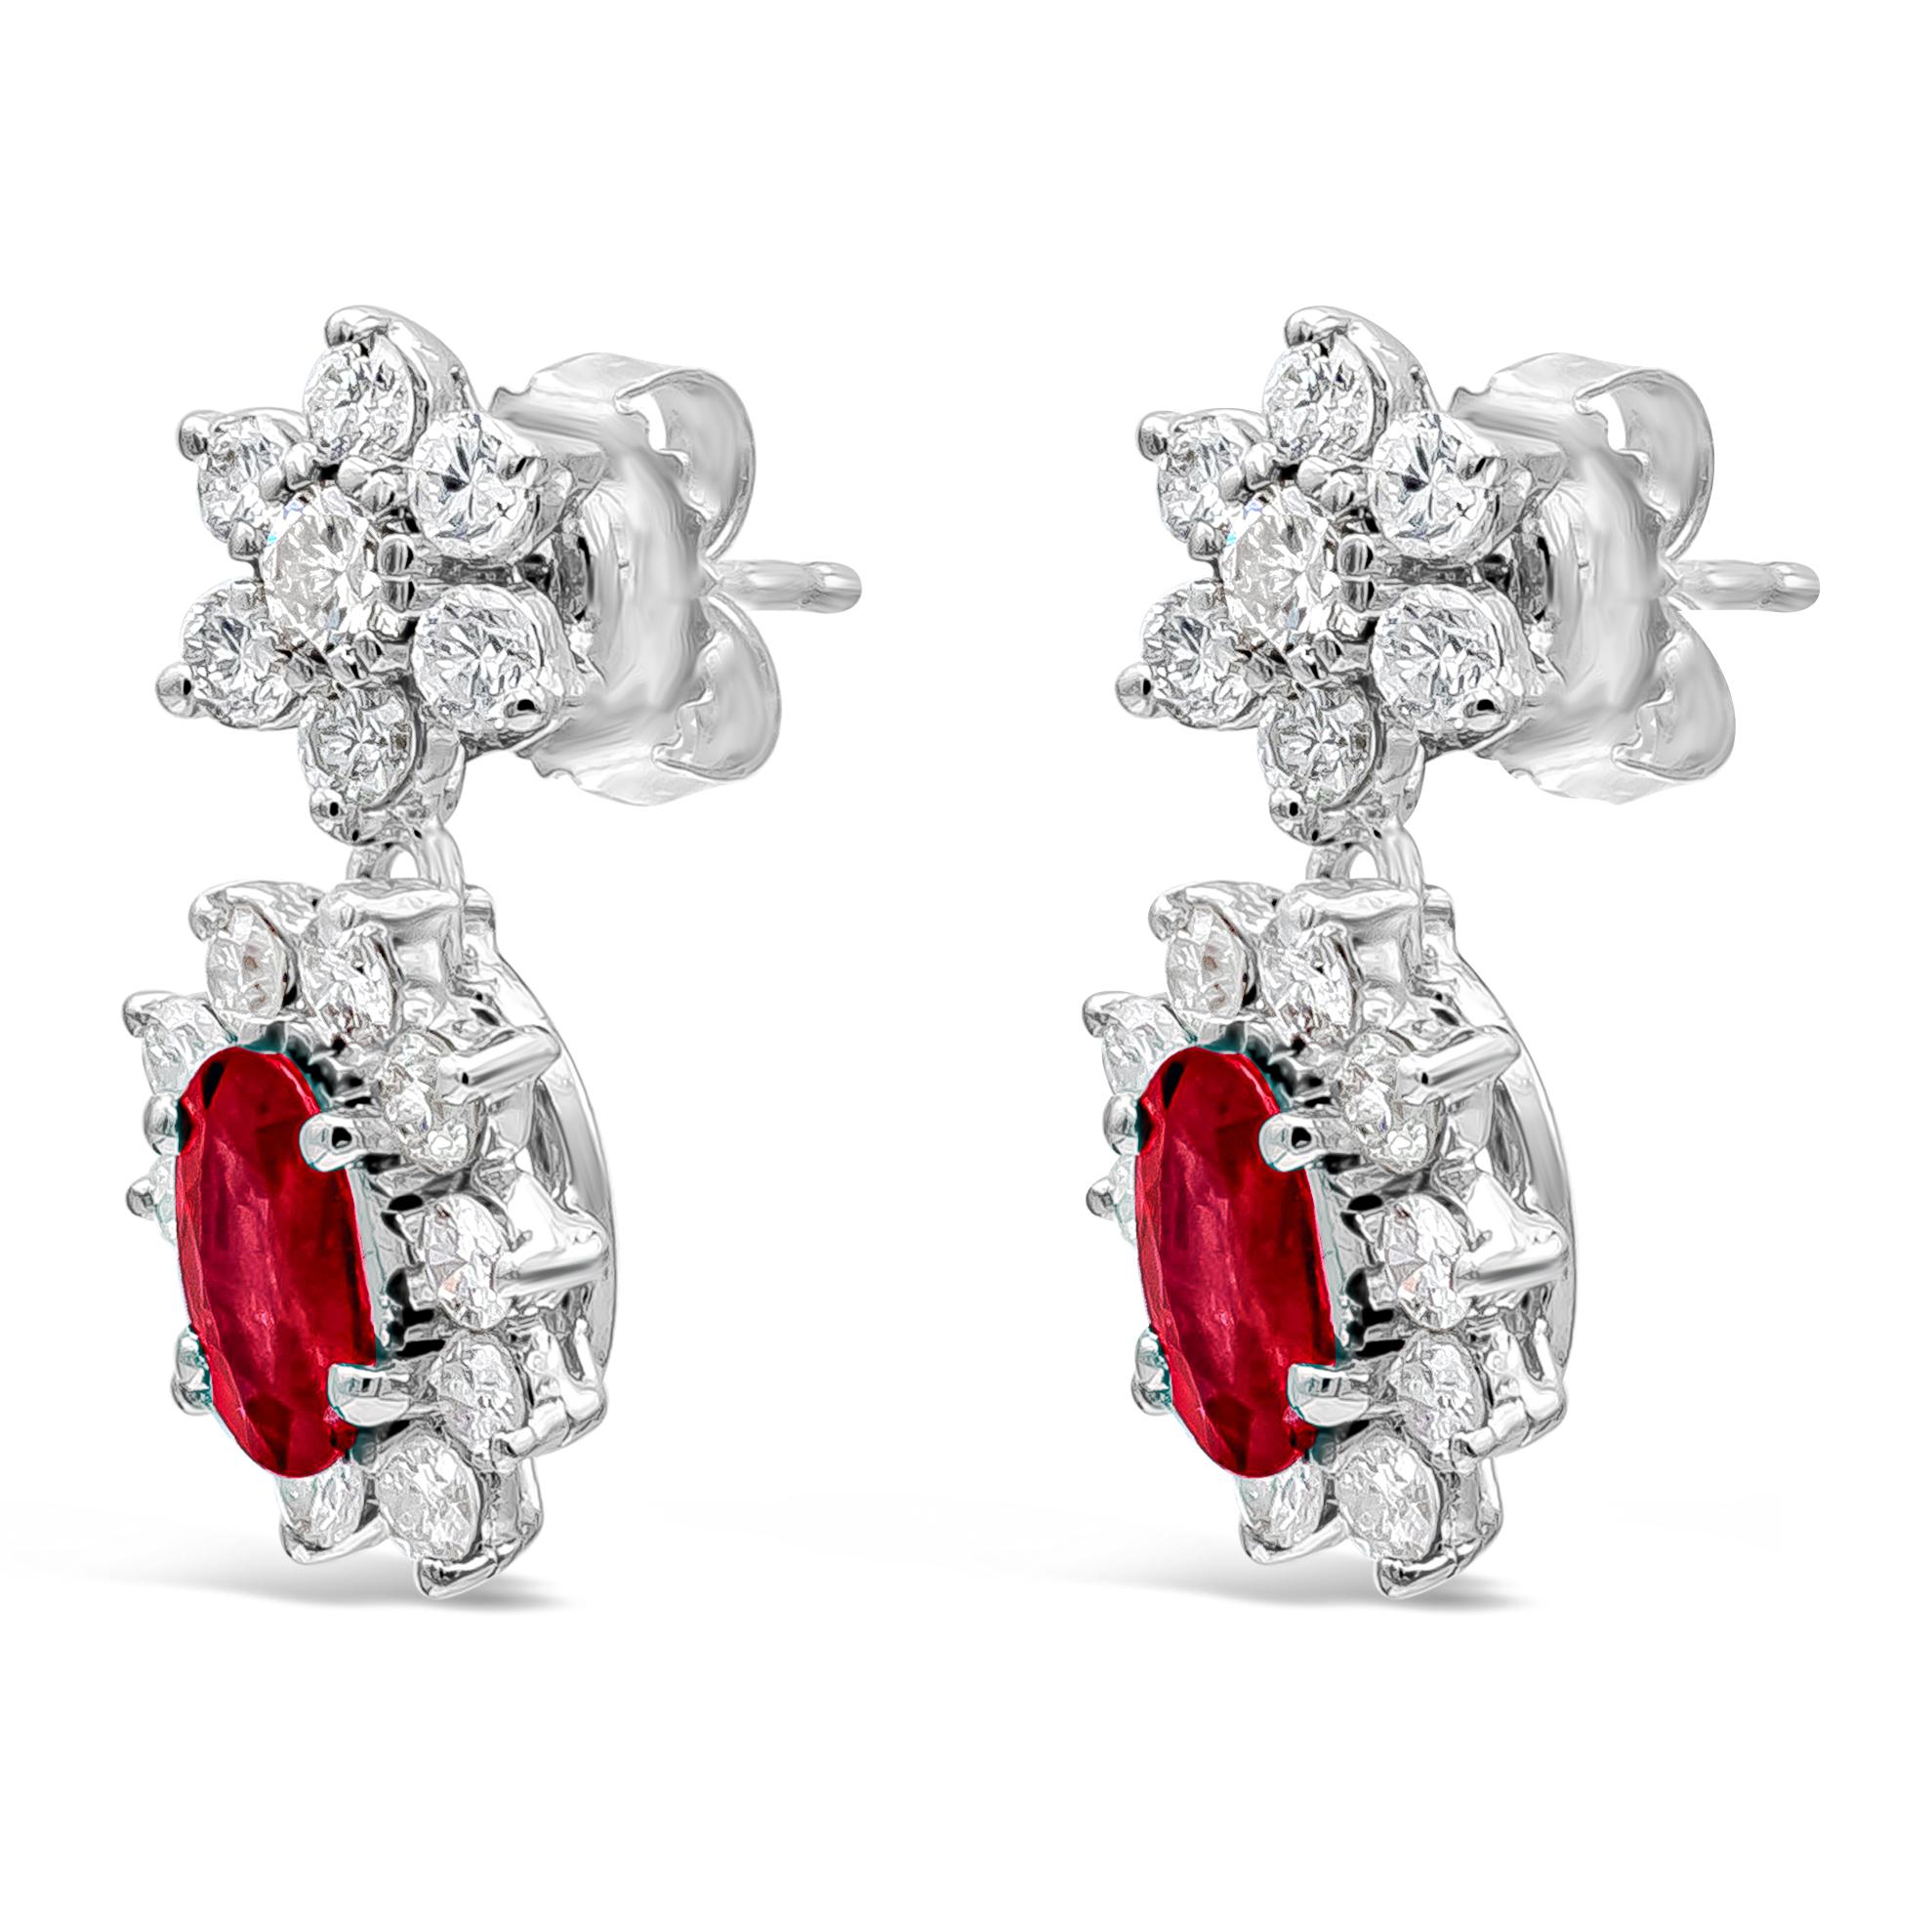 Elegant and chic classic drop earrings showcasing a beautiful oval cut ruby surrounded by round  diamonds, Suspended on a floral-motif round diamond halo. Ruby weighs 1.70 carats and diamonds weigh 1.74 carats total. Made with 18K White Gold

Style